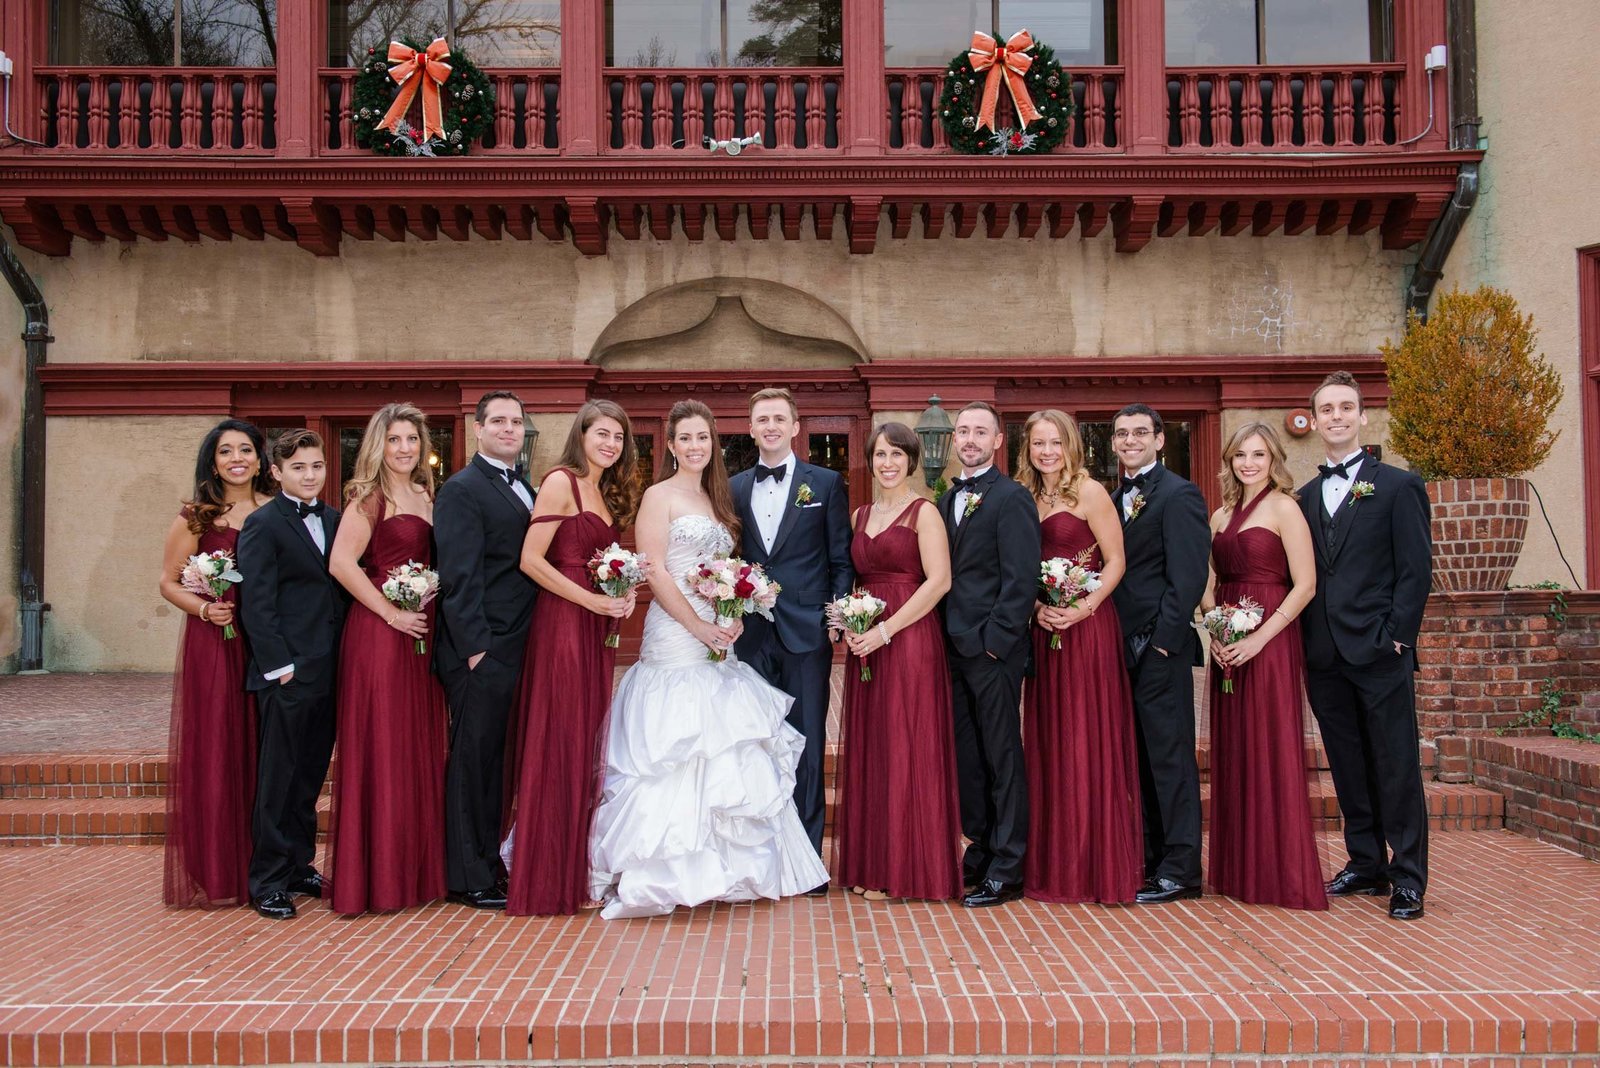 Coindre Hall bridal party photos